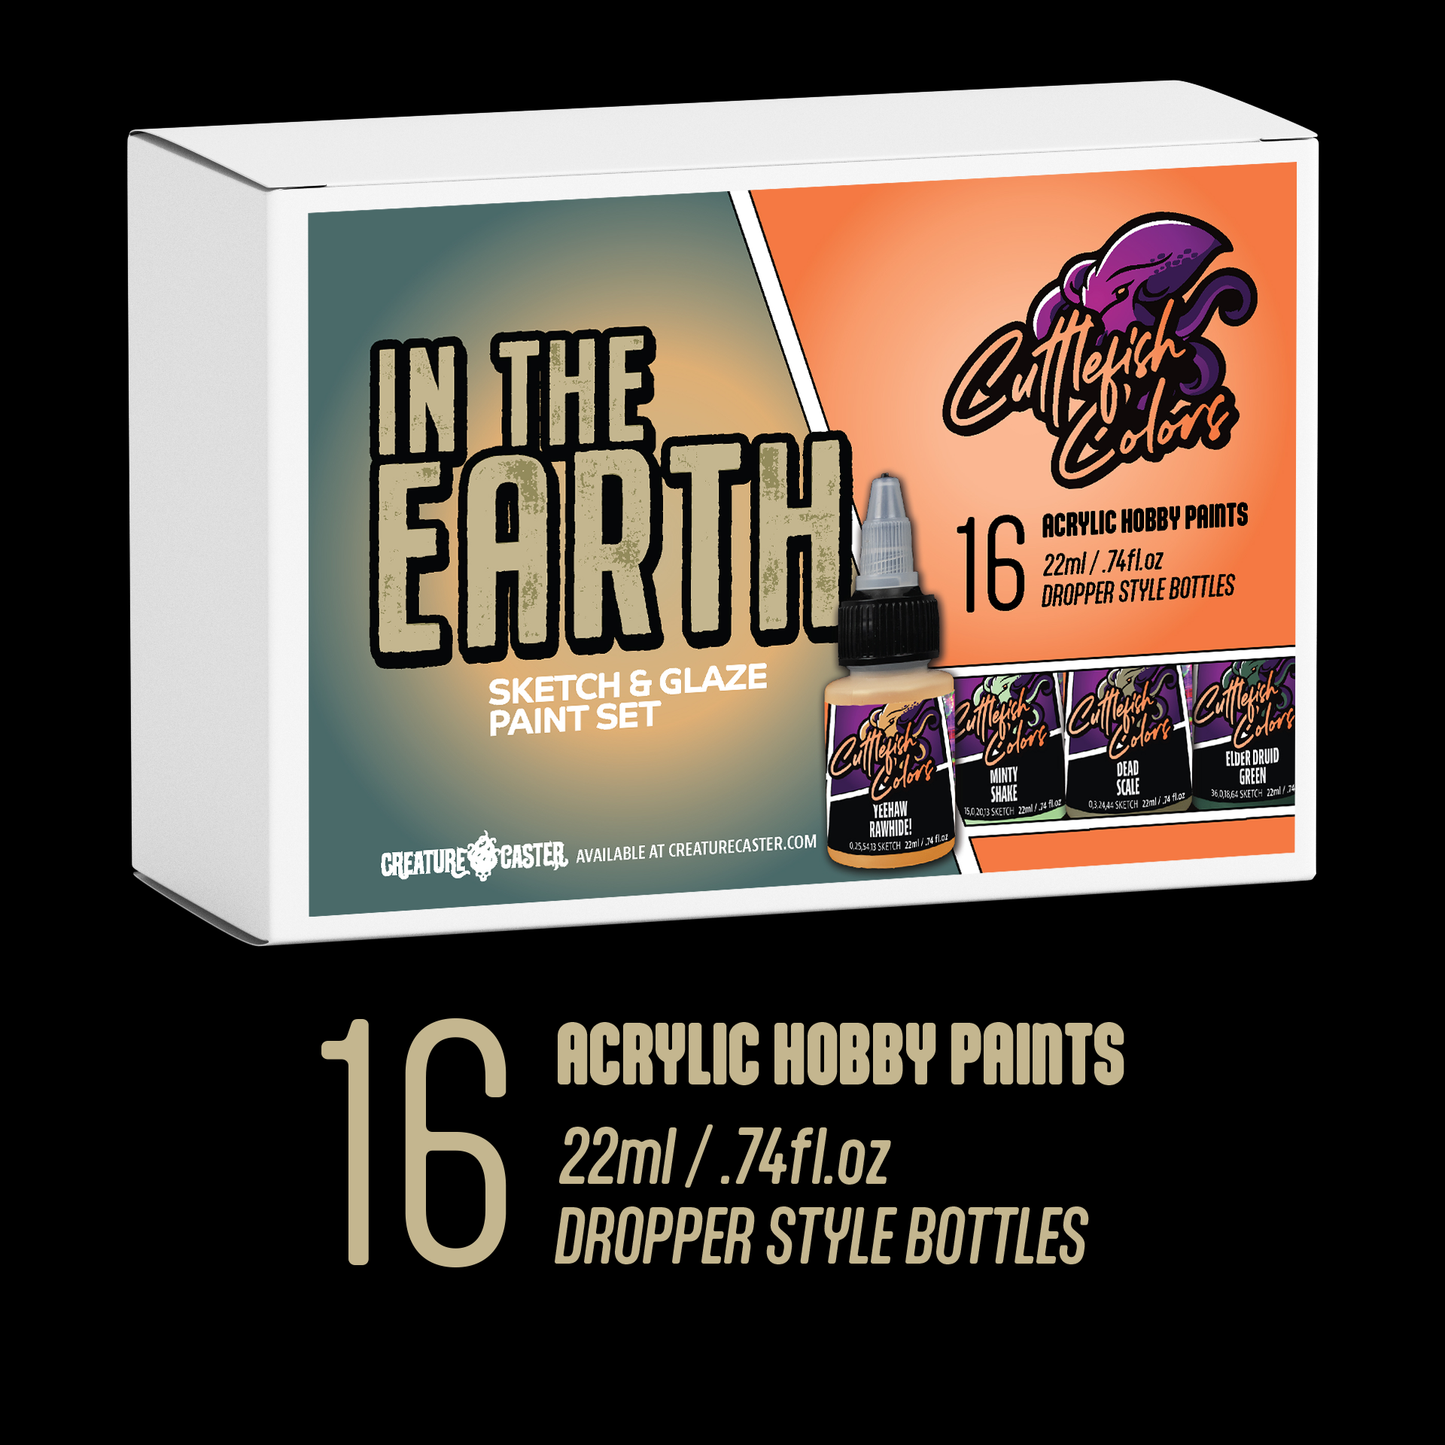 In The Earth Set of 16 Paints